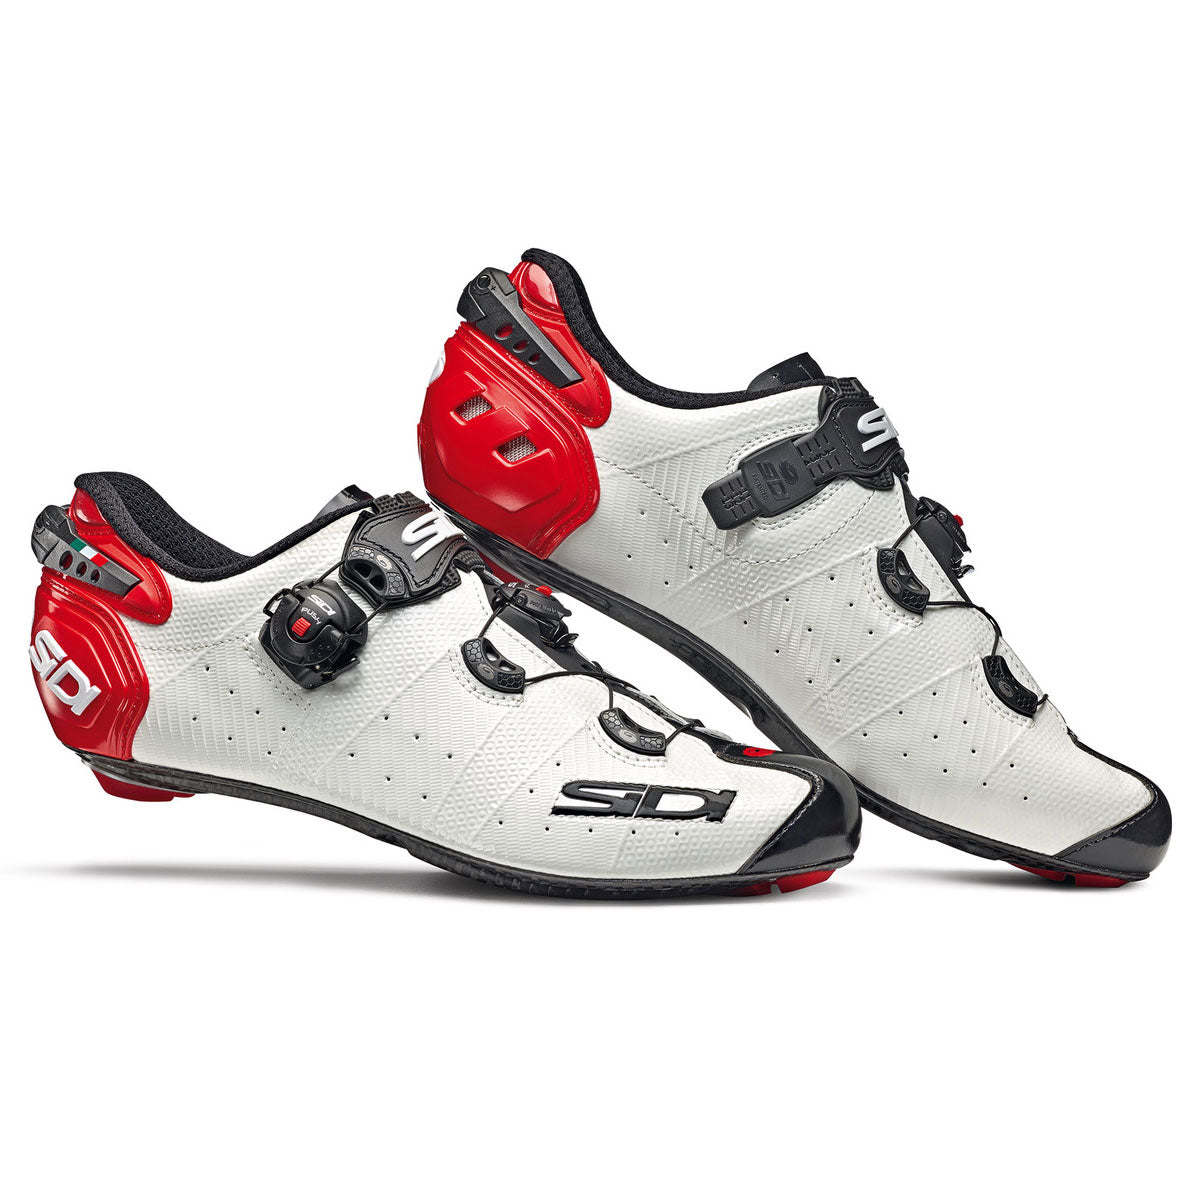 Verwijdering Danser Rijk Sidi Wire 2 Carbon shoes - White red – All4cycling